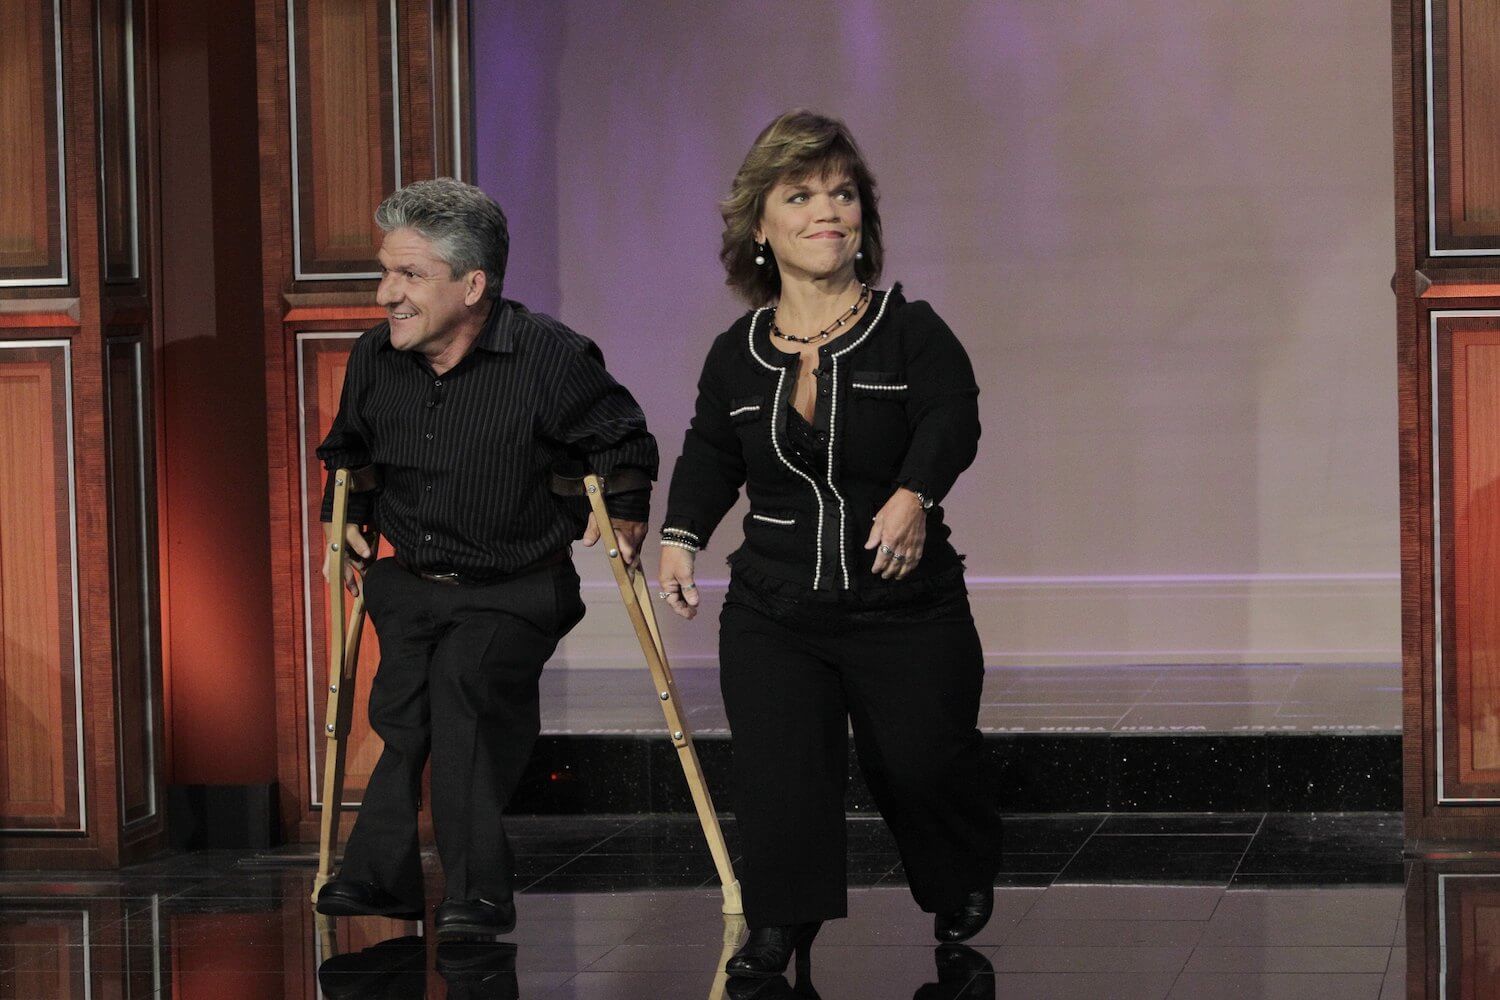 'Little People, Big World' stars Matt and Amy Roloff walking on stage together